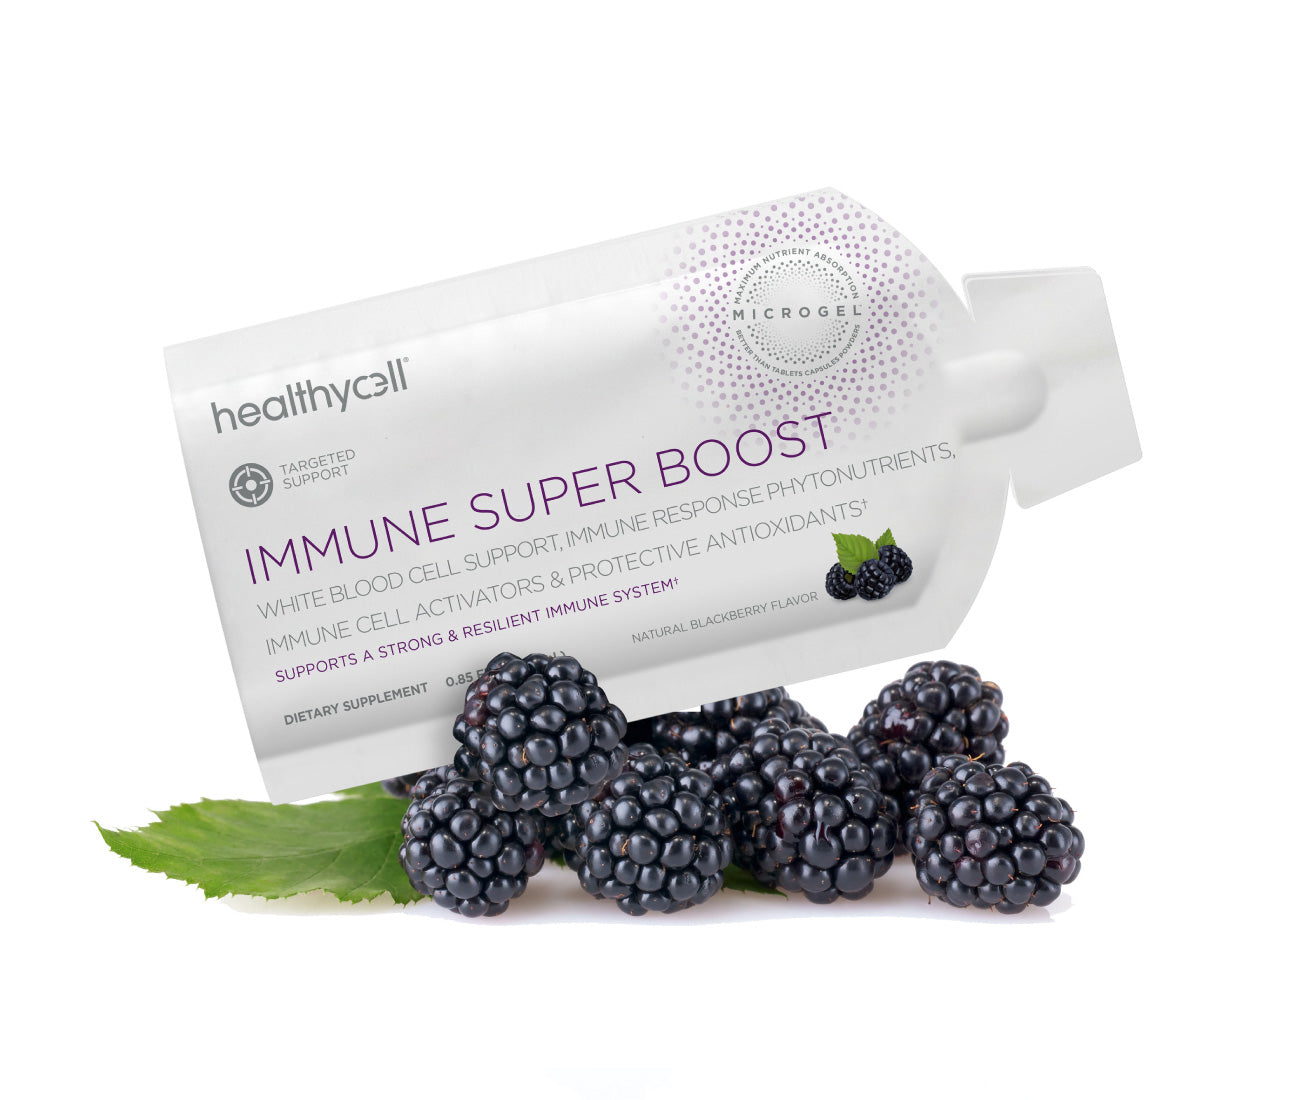  Immune Super Boost by Healthycell Healthycell Perfumarie